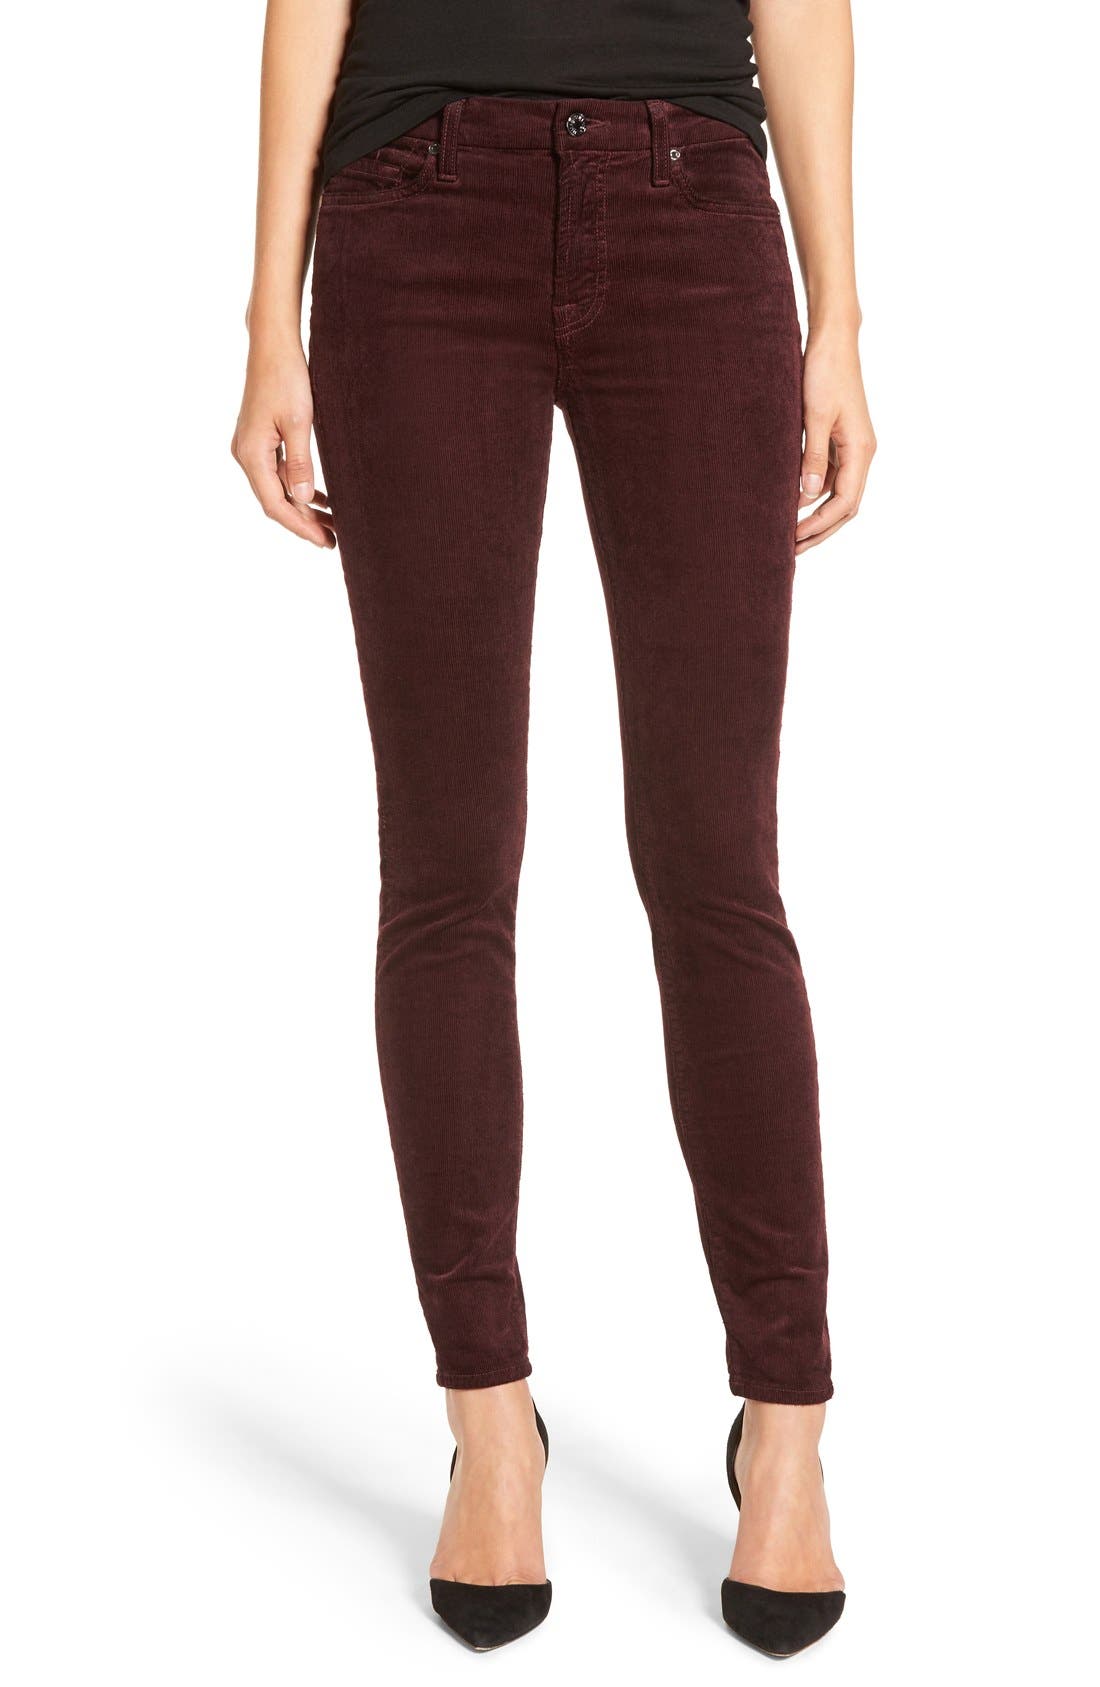 7 for all mankind corduroy